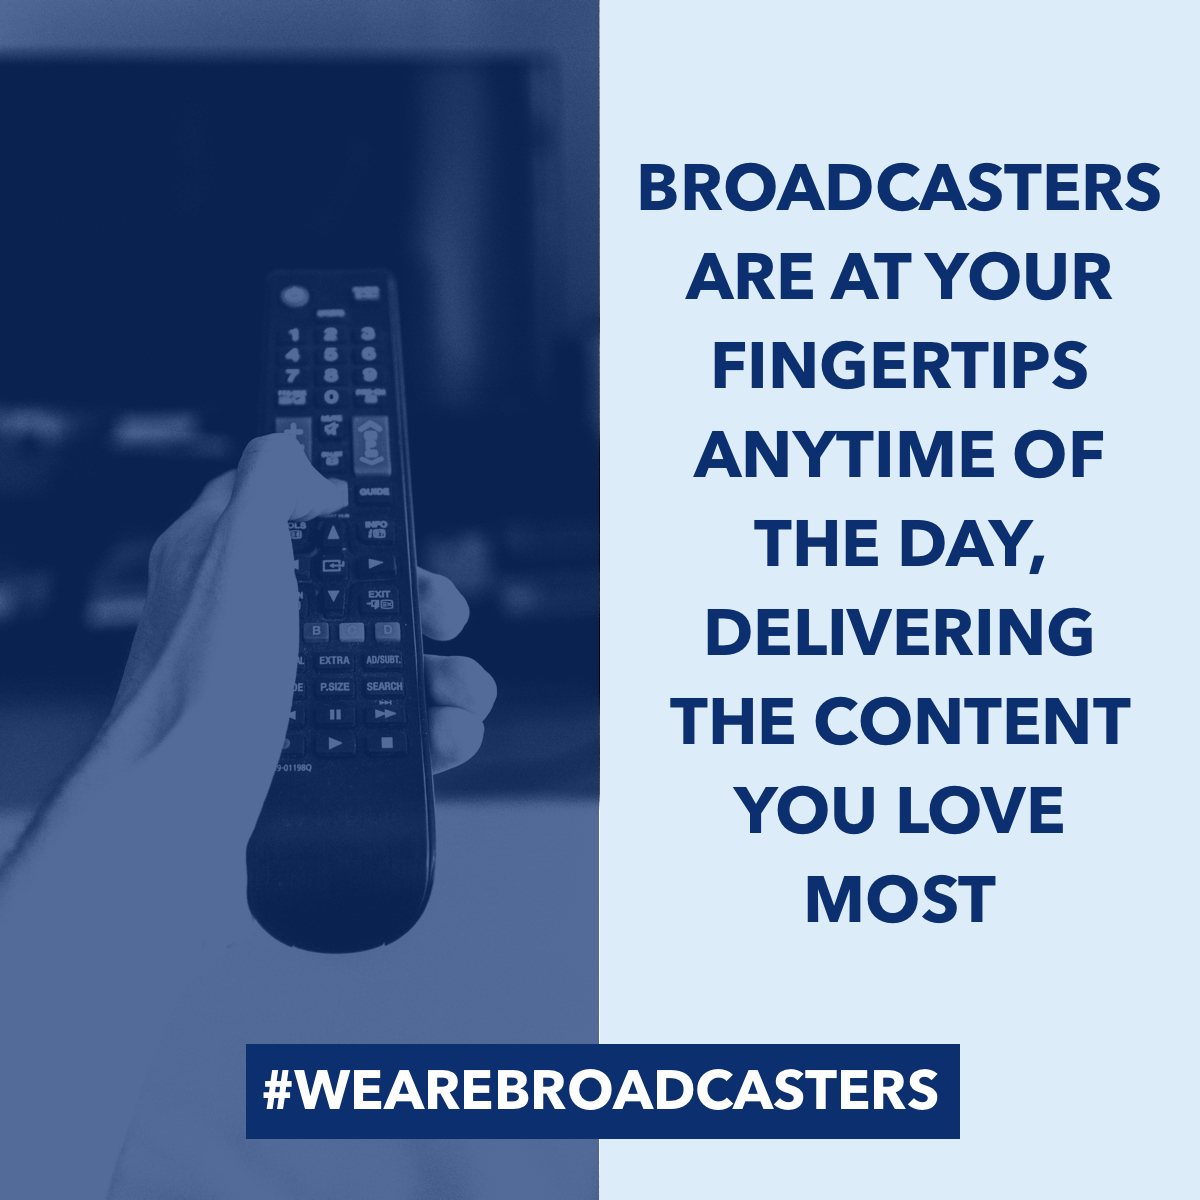 Broadcasters are at your fingertips anytime of the day, delivering the content you love most